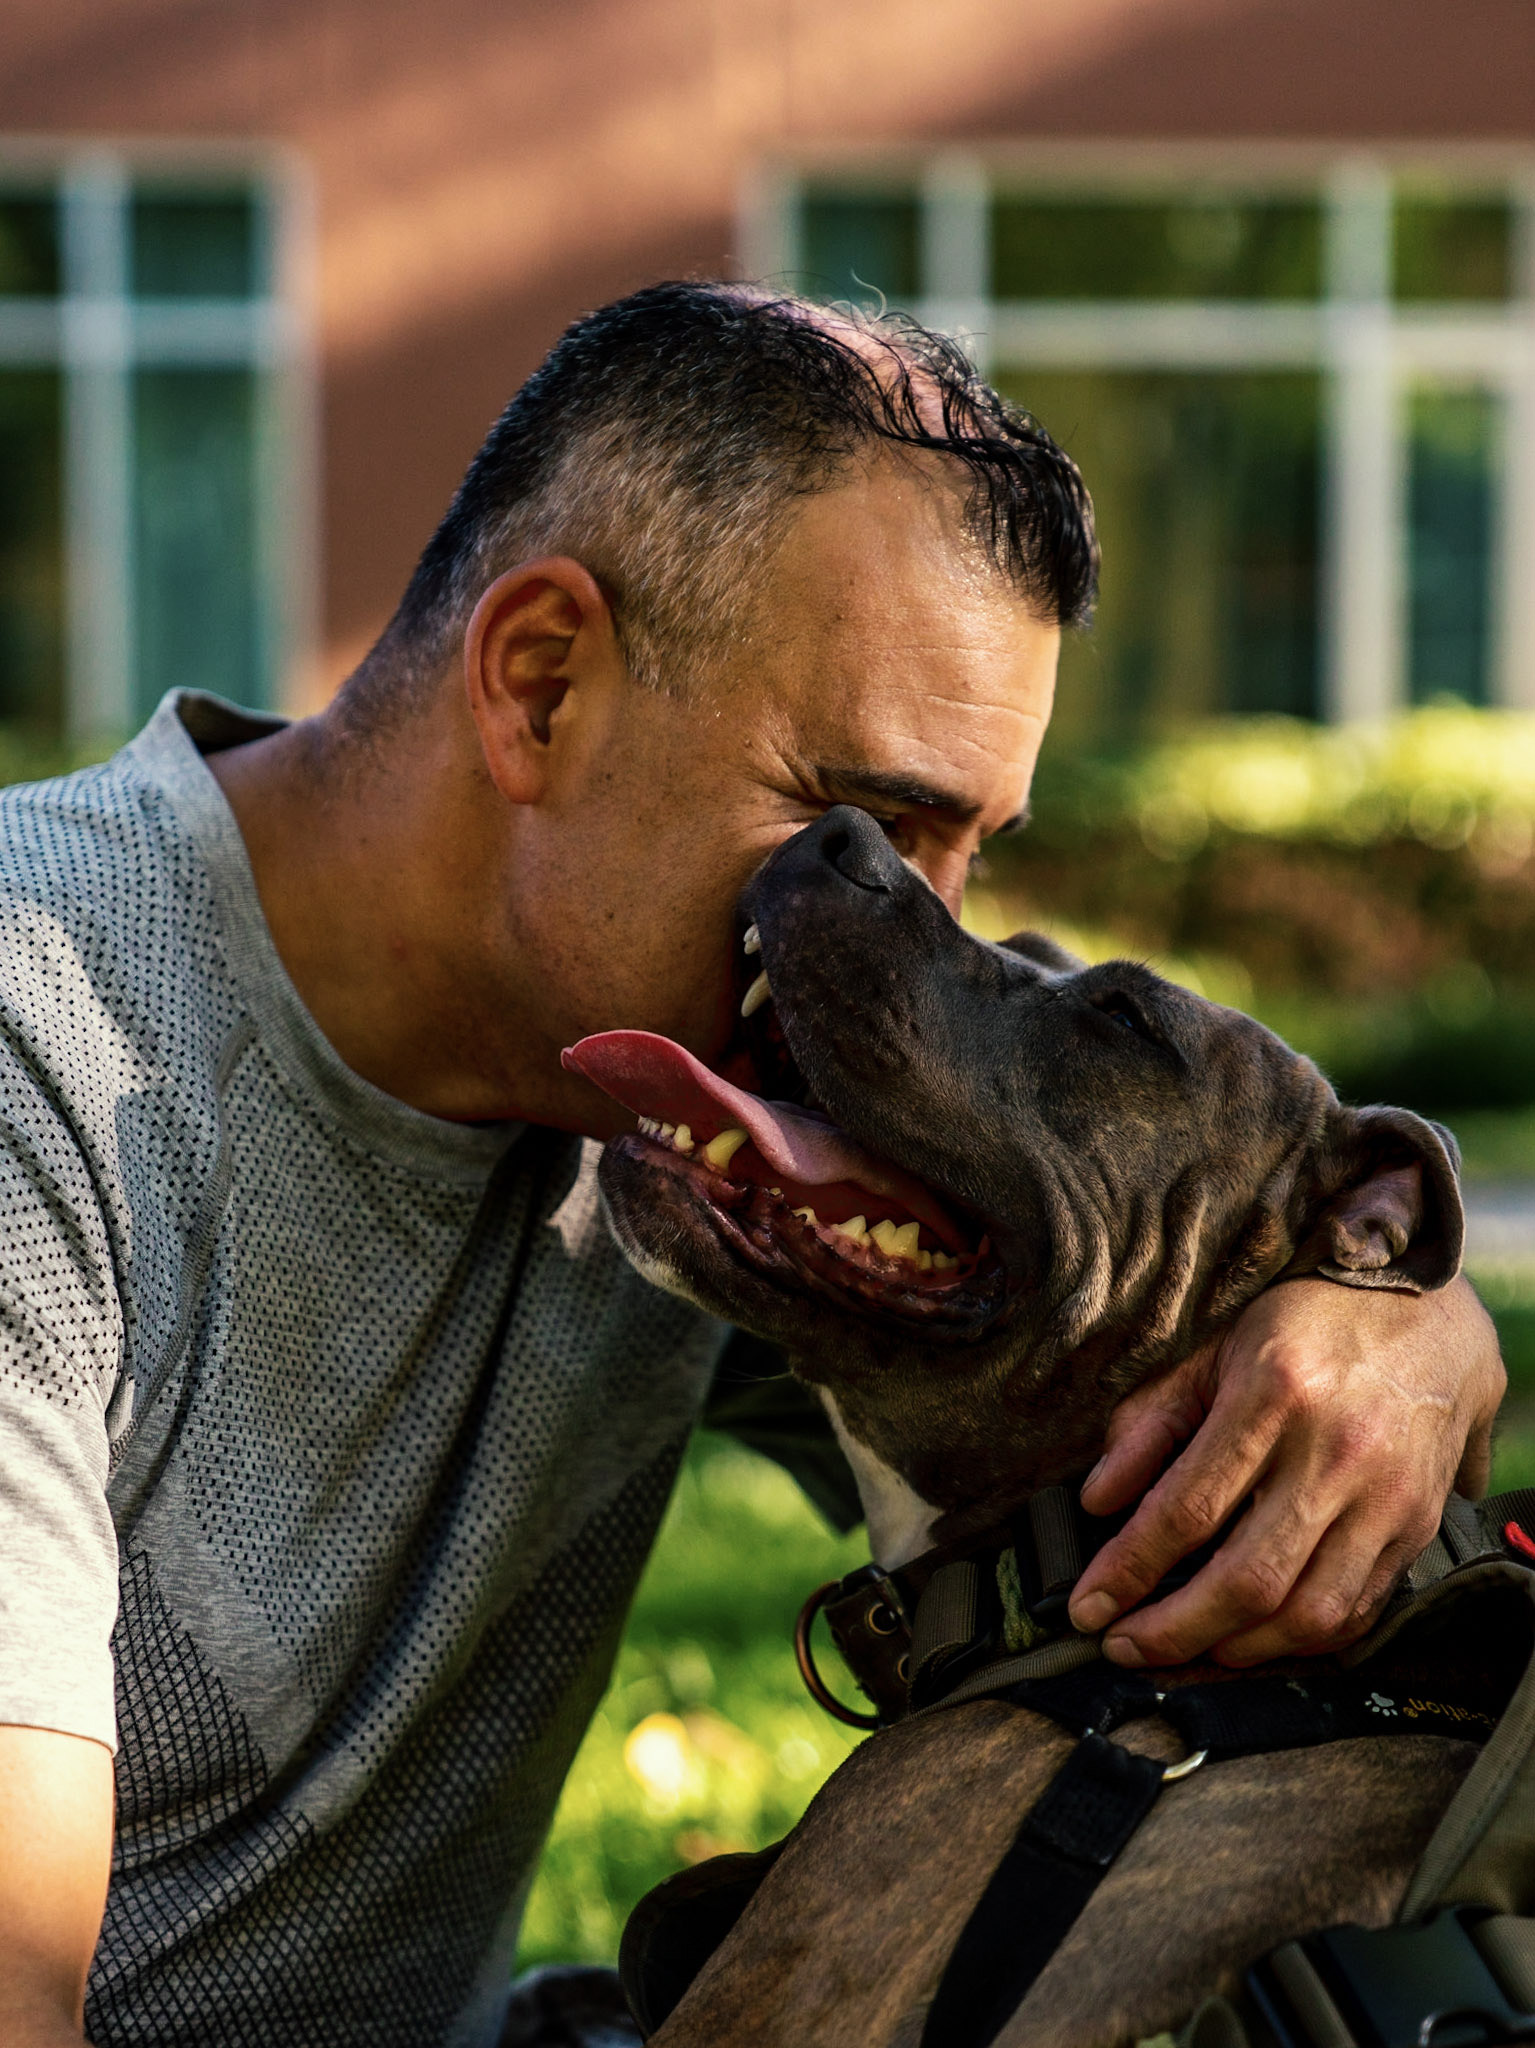 Sergio, a Marine veteran with his service dog Laramie. Sergio will graduate from Tony La Russa's Animal Rescue Foundation’s Pets and Vets program in 2019. ARF has once again partnered with Purina Dog Chow for its second annual “Service Dog Salute” campaign to raise awareness on how military veterans suffering from PTSD and their families benefit from having a service dog.